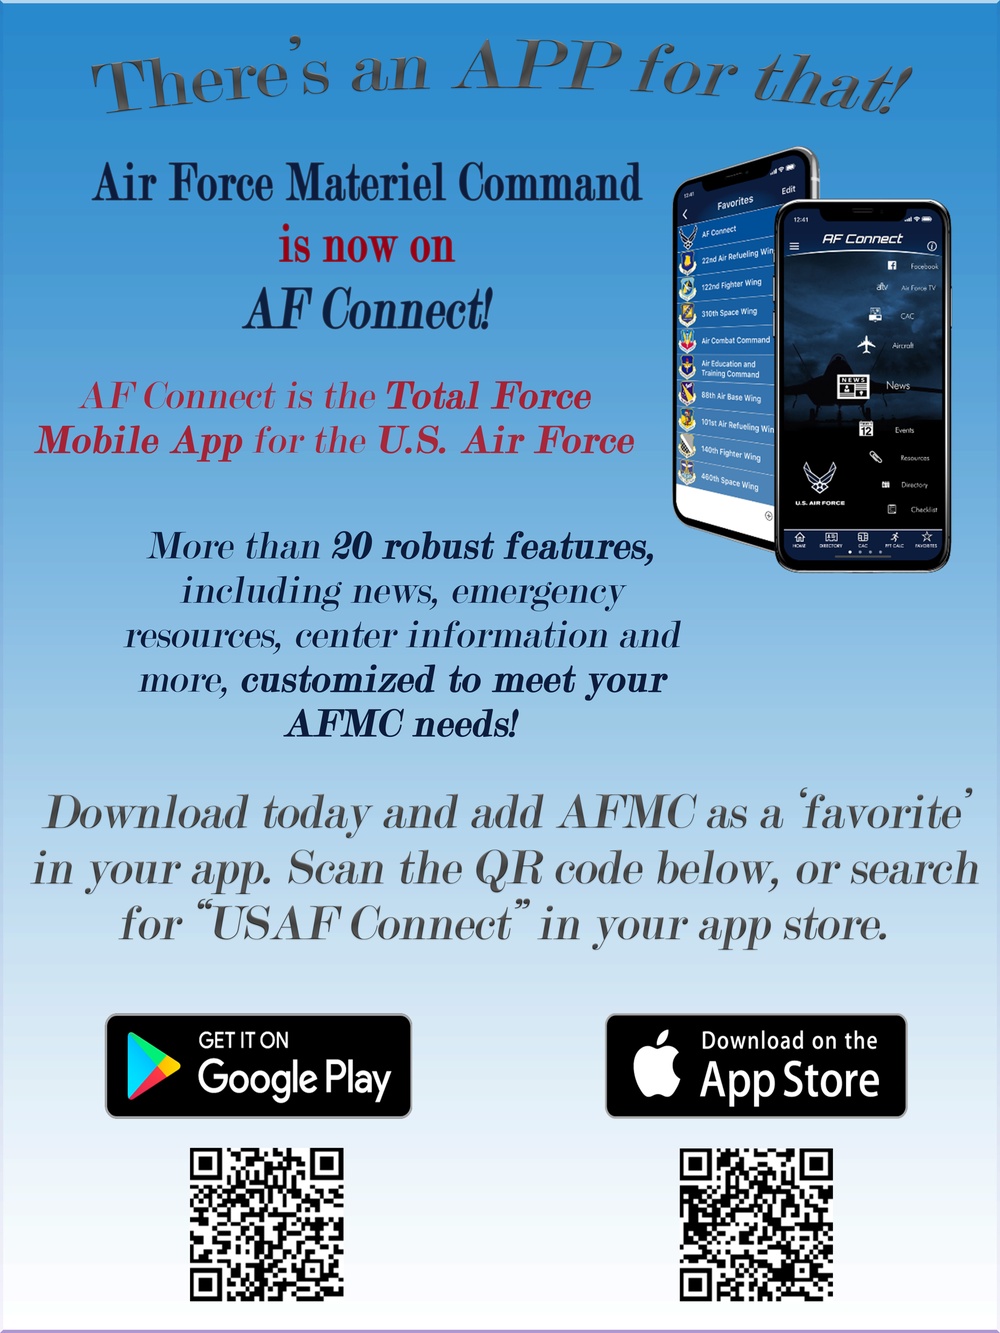 AFMC on the USAF Connect App